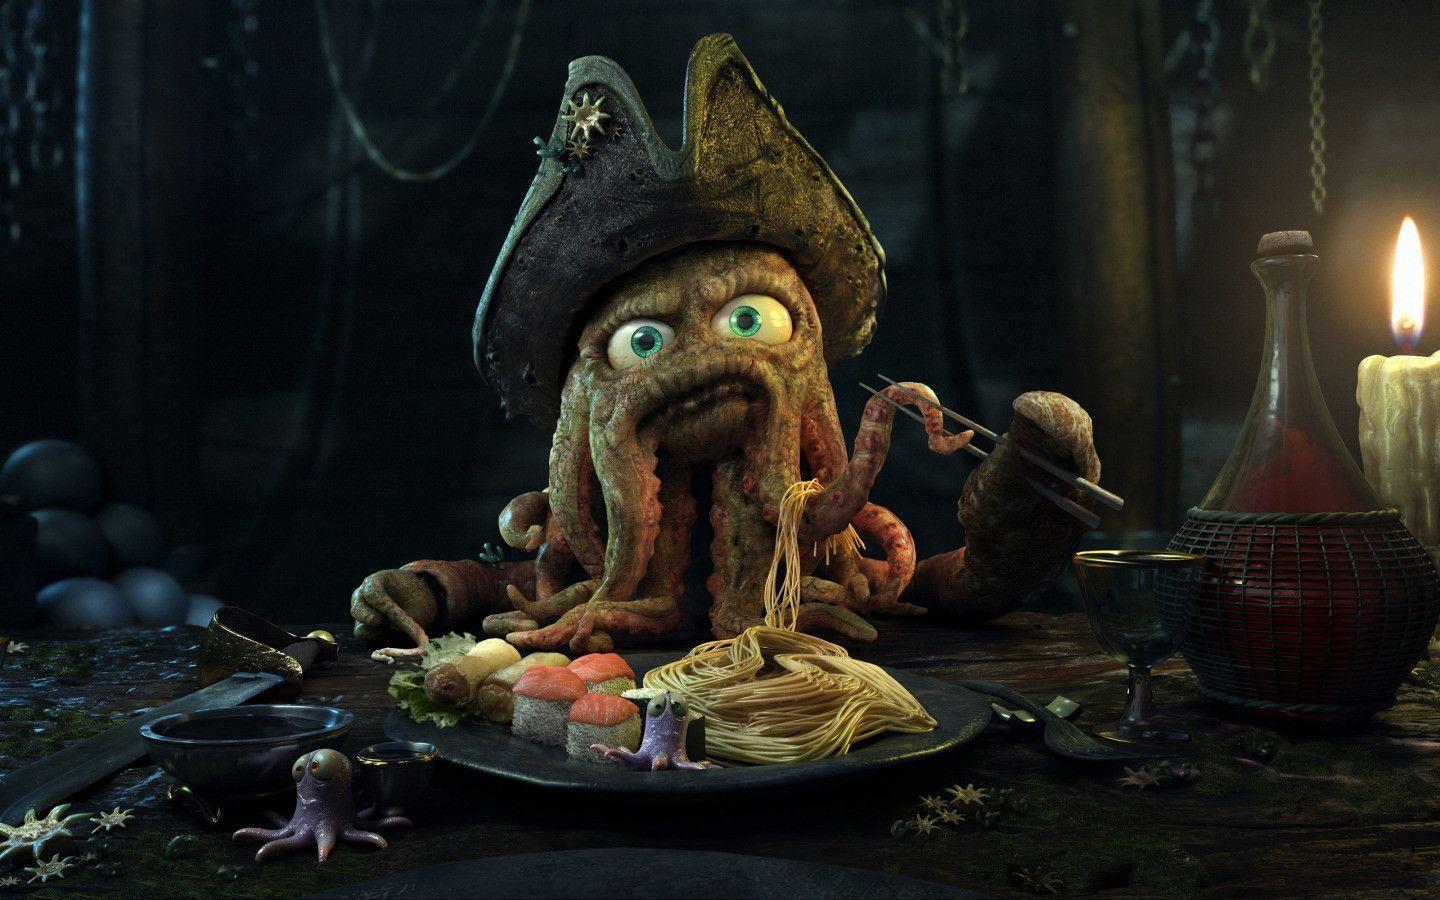 Sushi Dinner for Octopus Pirate widescreen wallpaper. Wide